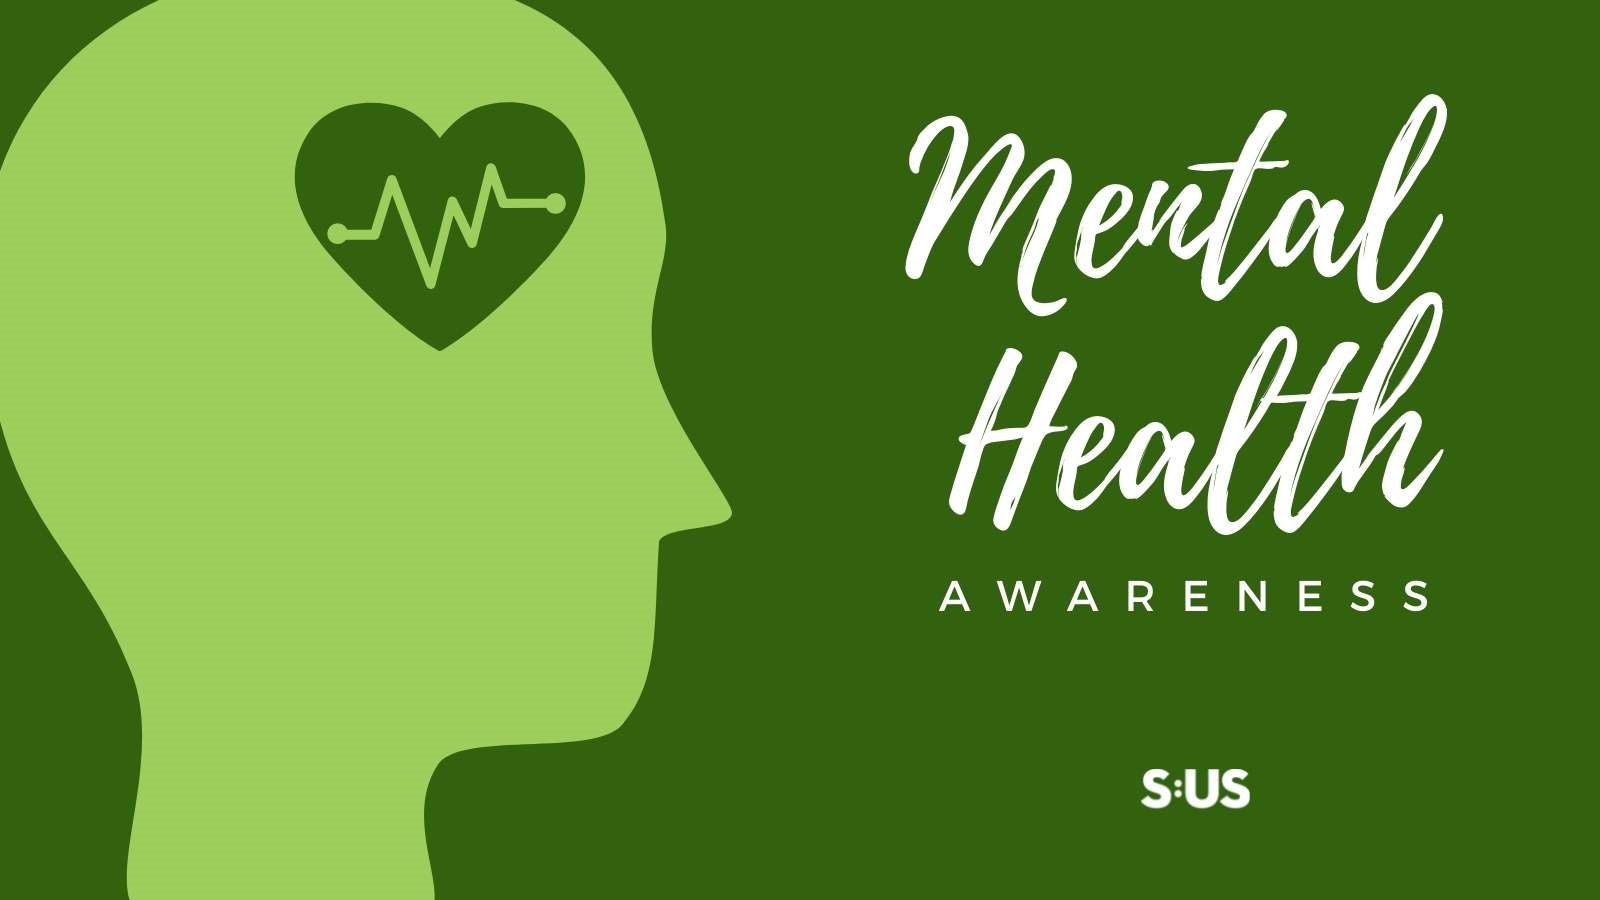 Supporting Mental Health Awareness Month